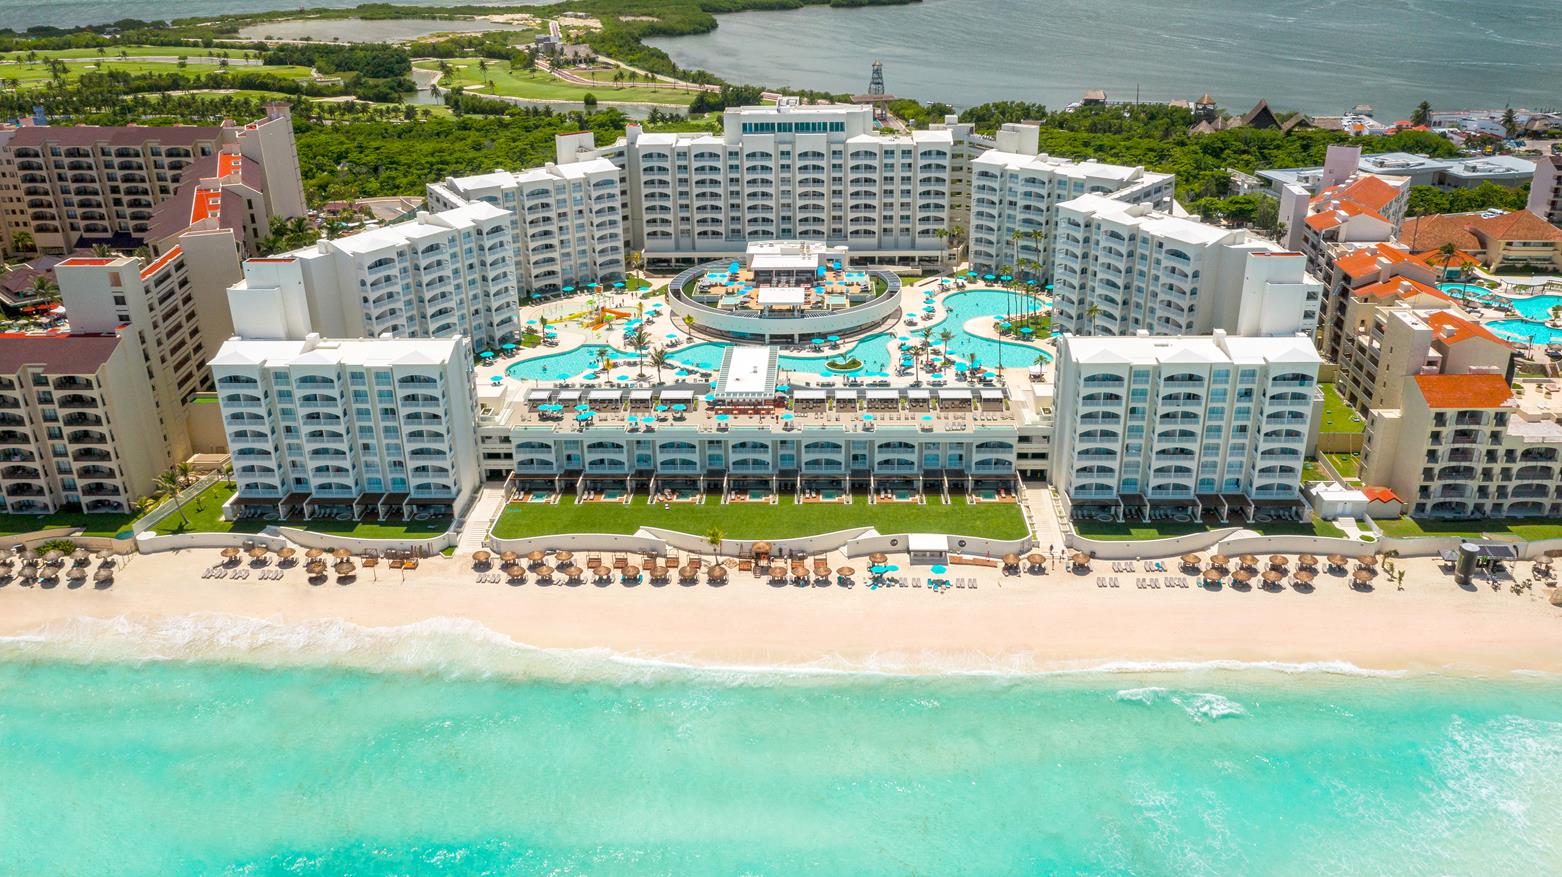 Property image of Hilton Cancún Mar Caribe All-Inclusive Resort